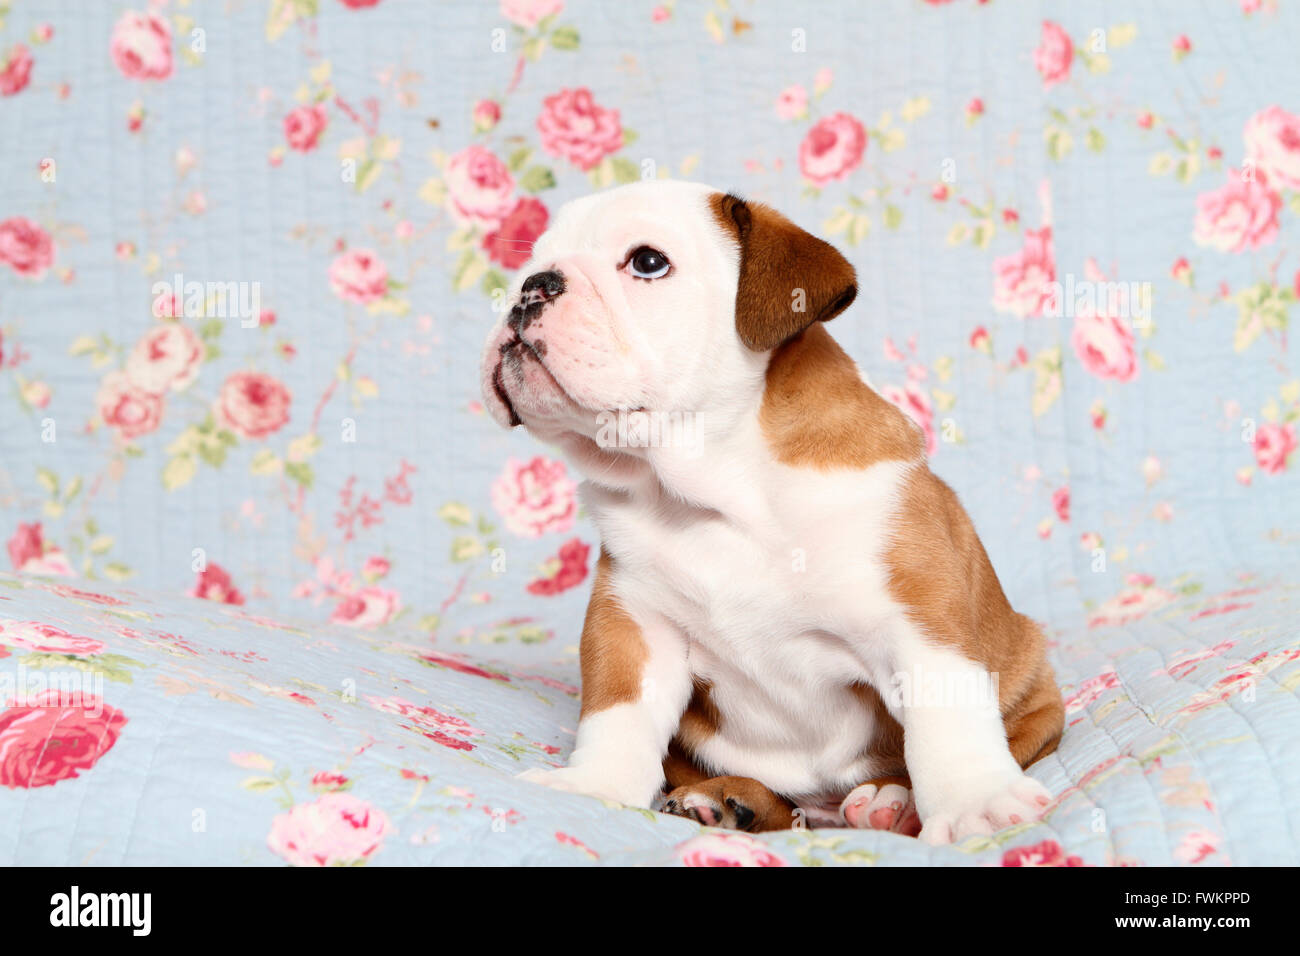 English Bulldog. Puppy (7 weeks old) sitting on a blue blanket with rose flower print. Germany Stock Photo